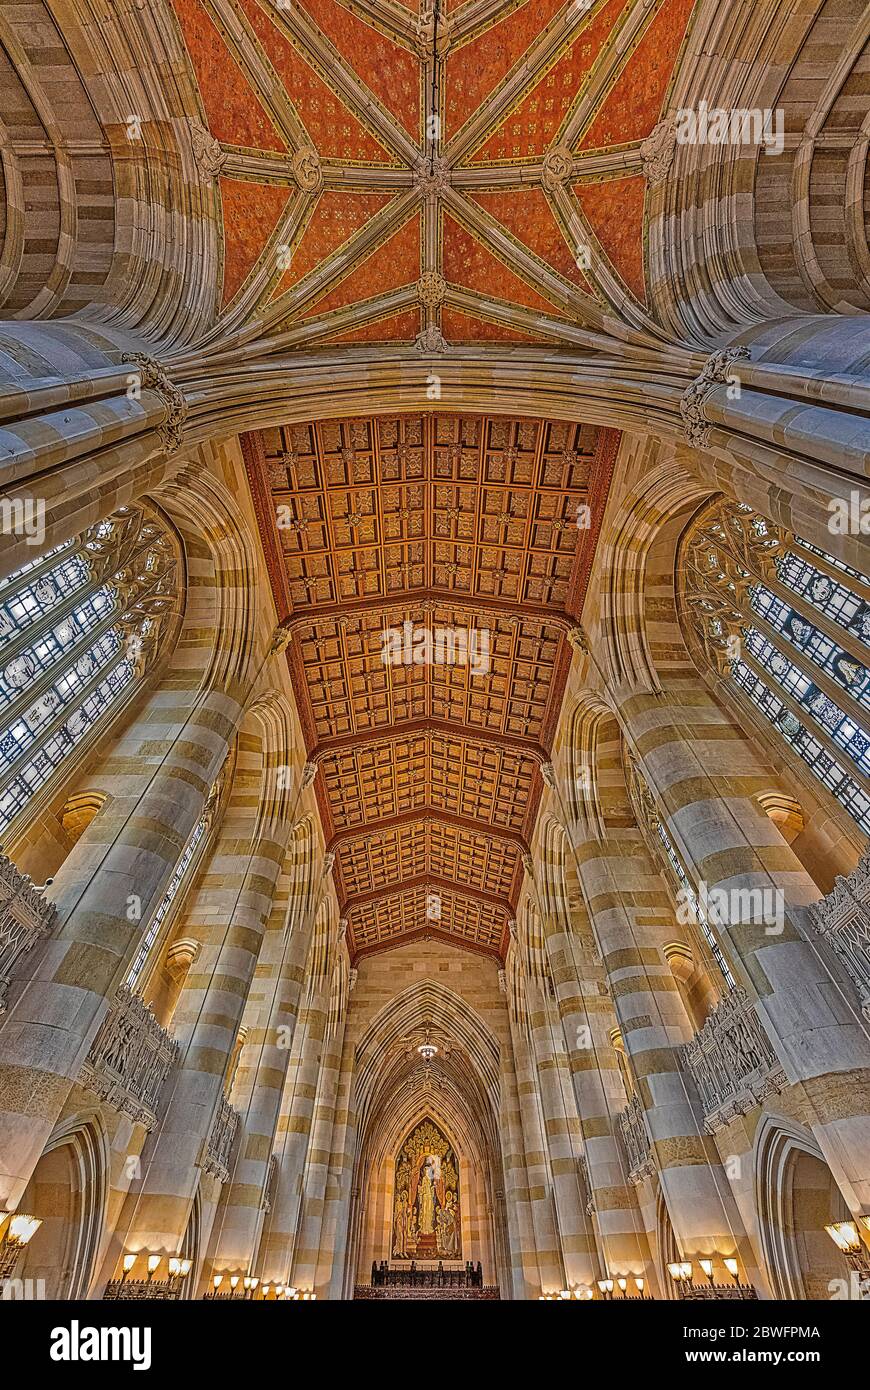 Sterling Library Yale University CT - Interior view of Collegiate Gothic architecture style main library at Yale University. Stock Photo